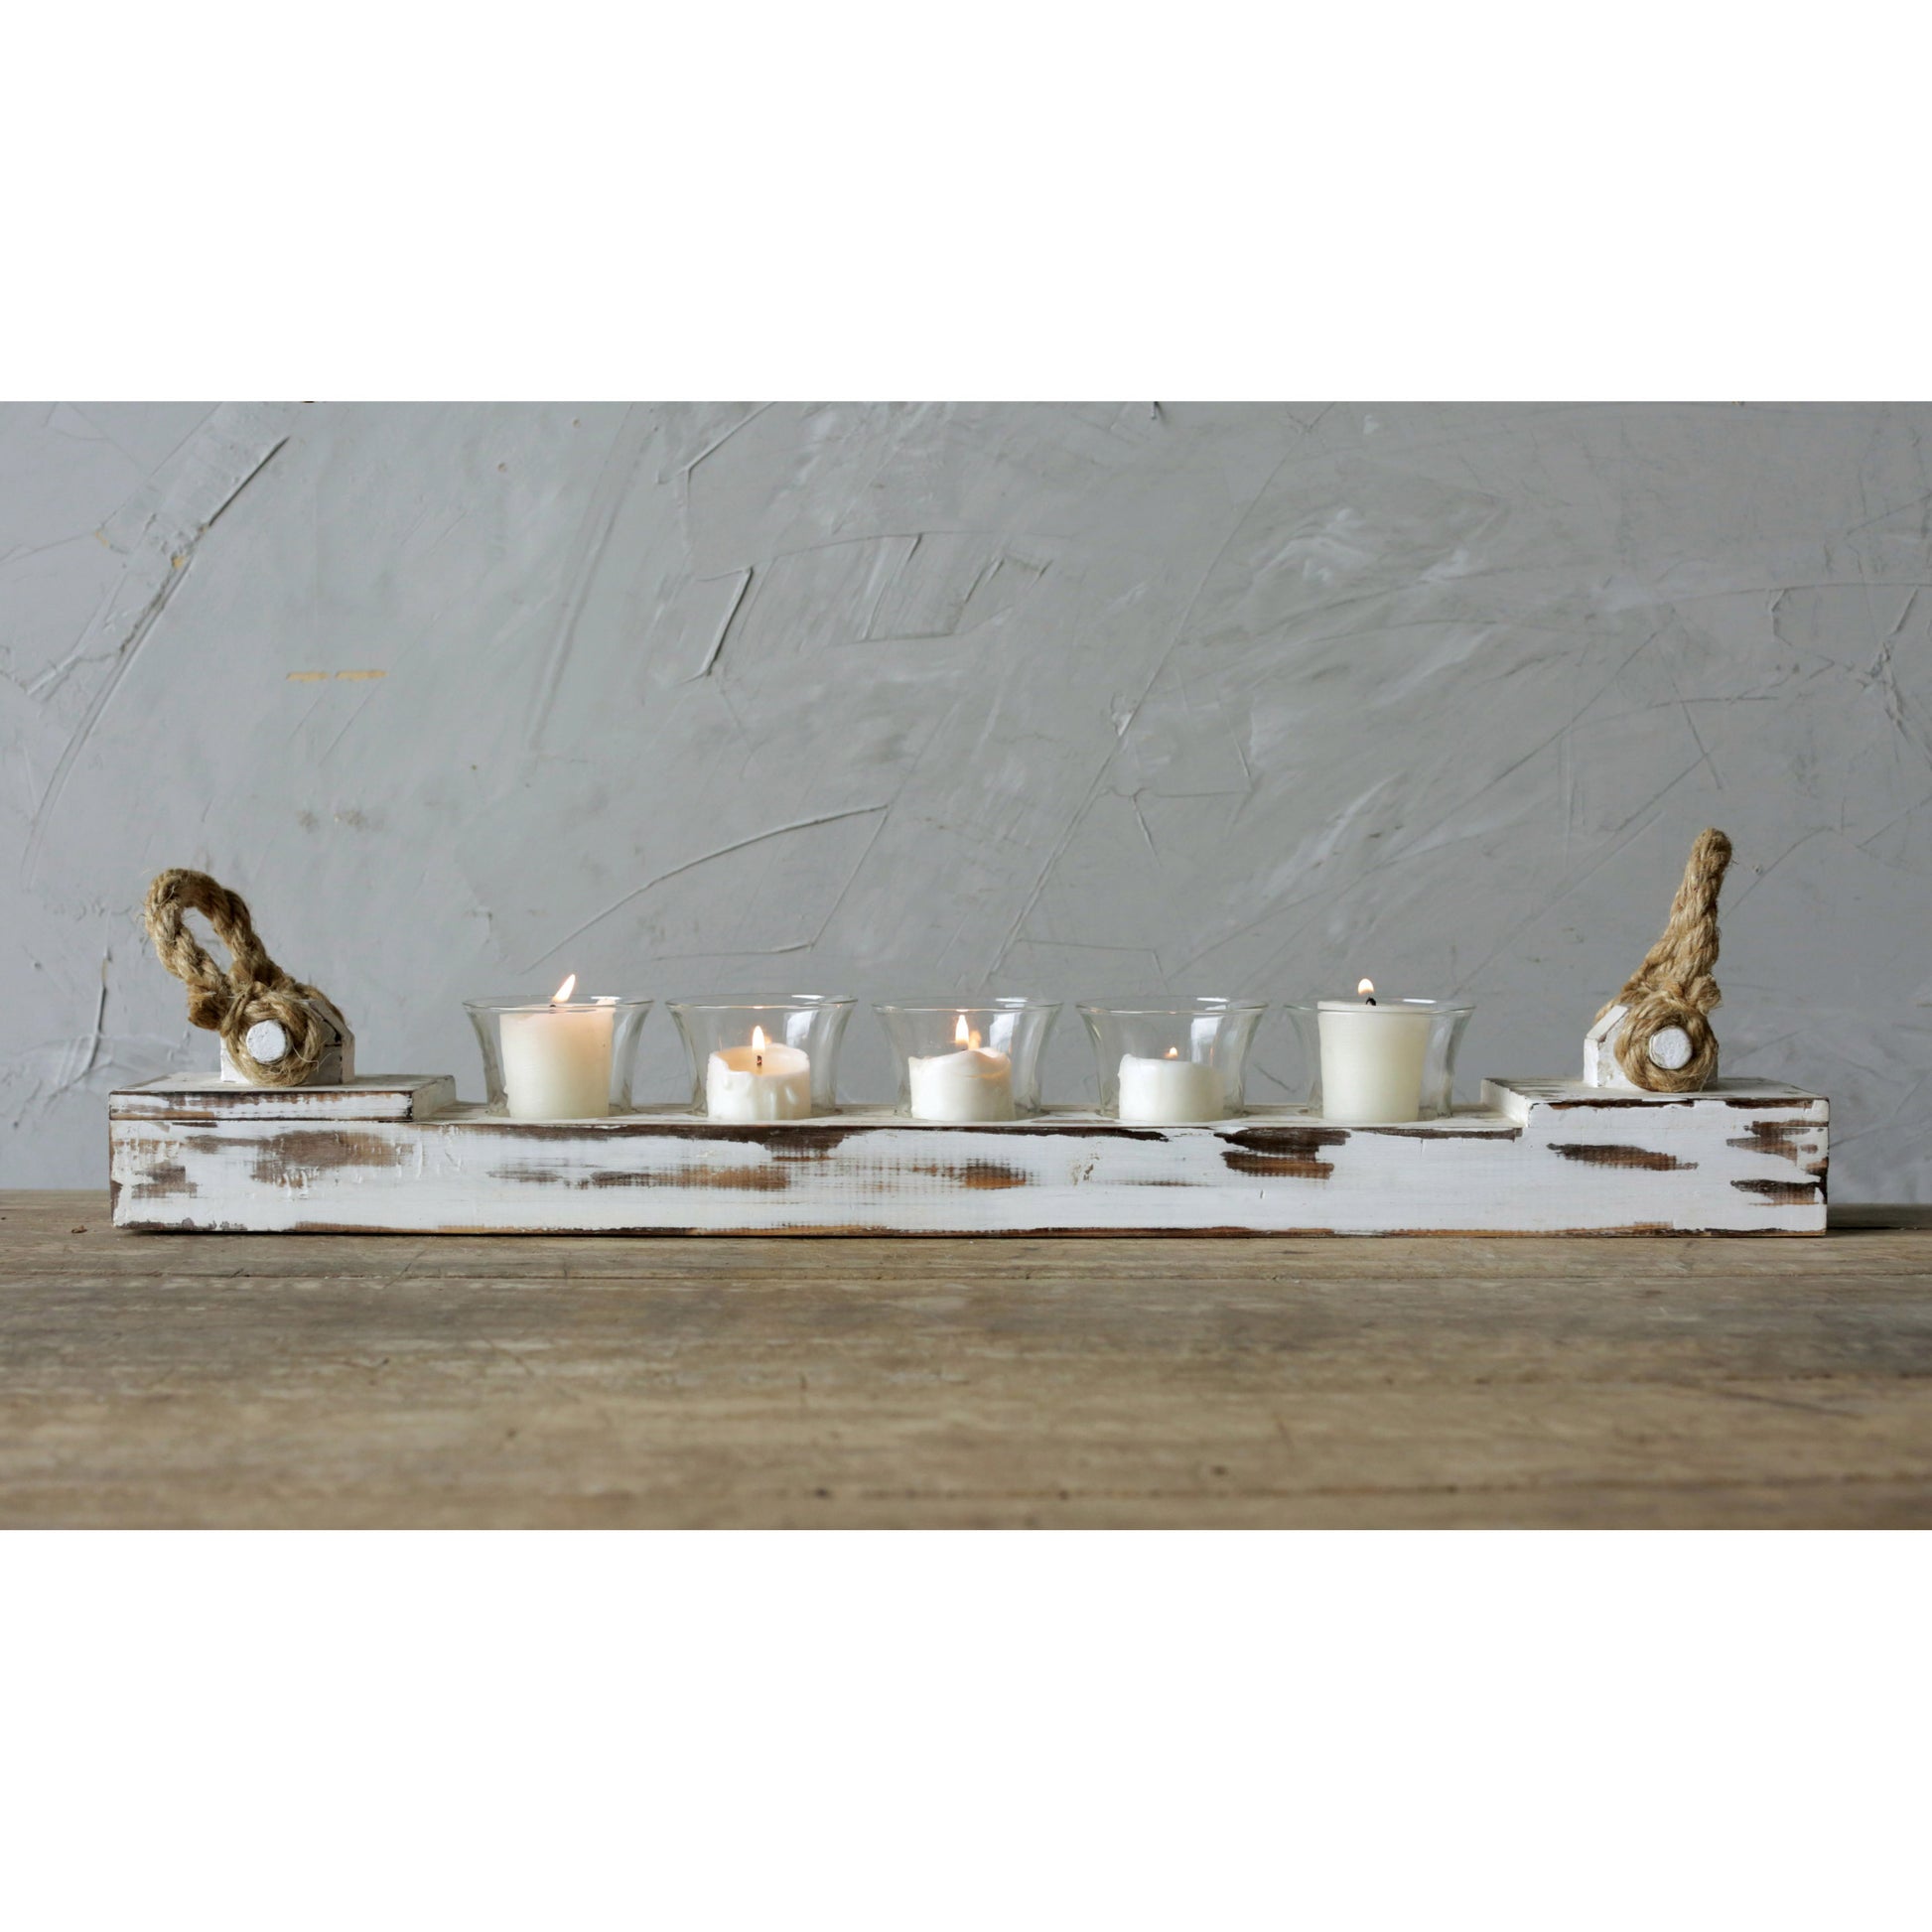 Distressed Wood Votive Holder with Cups